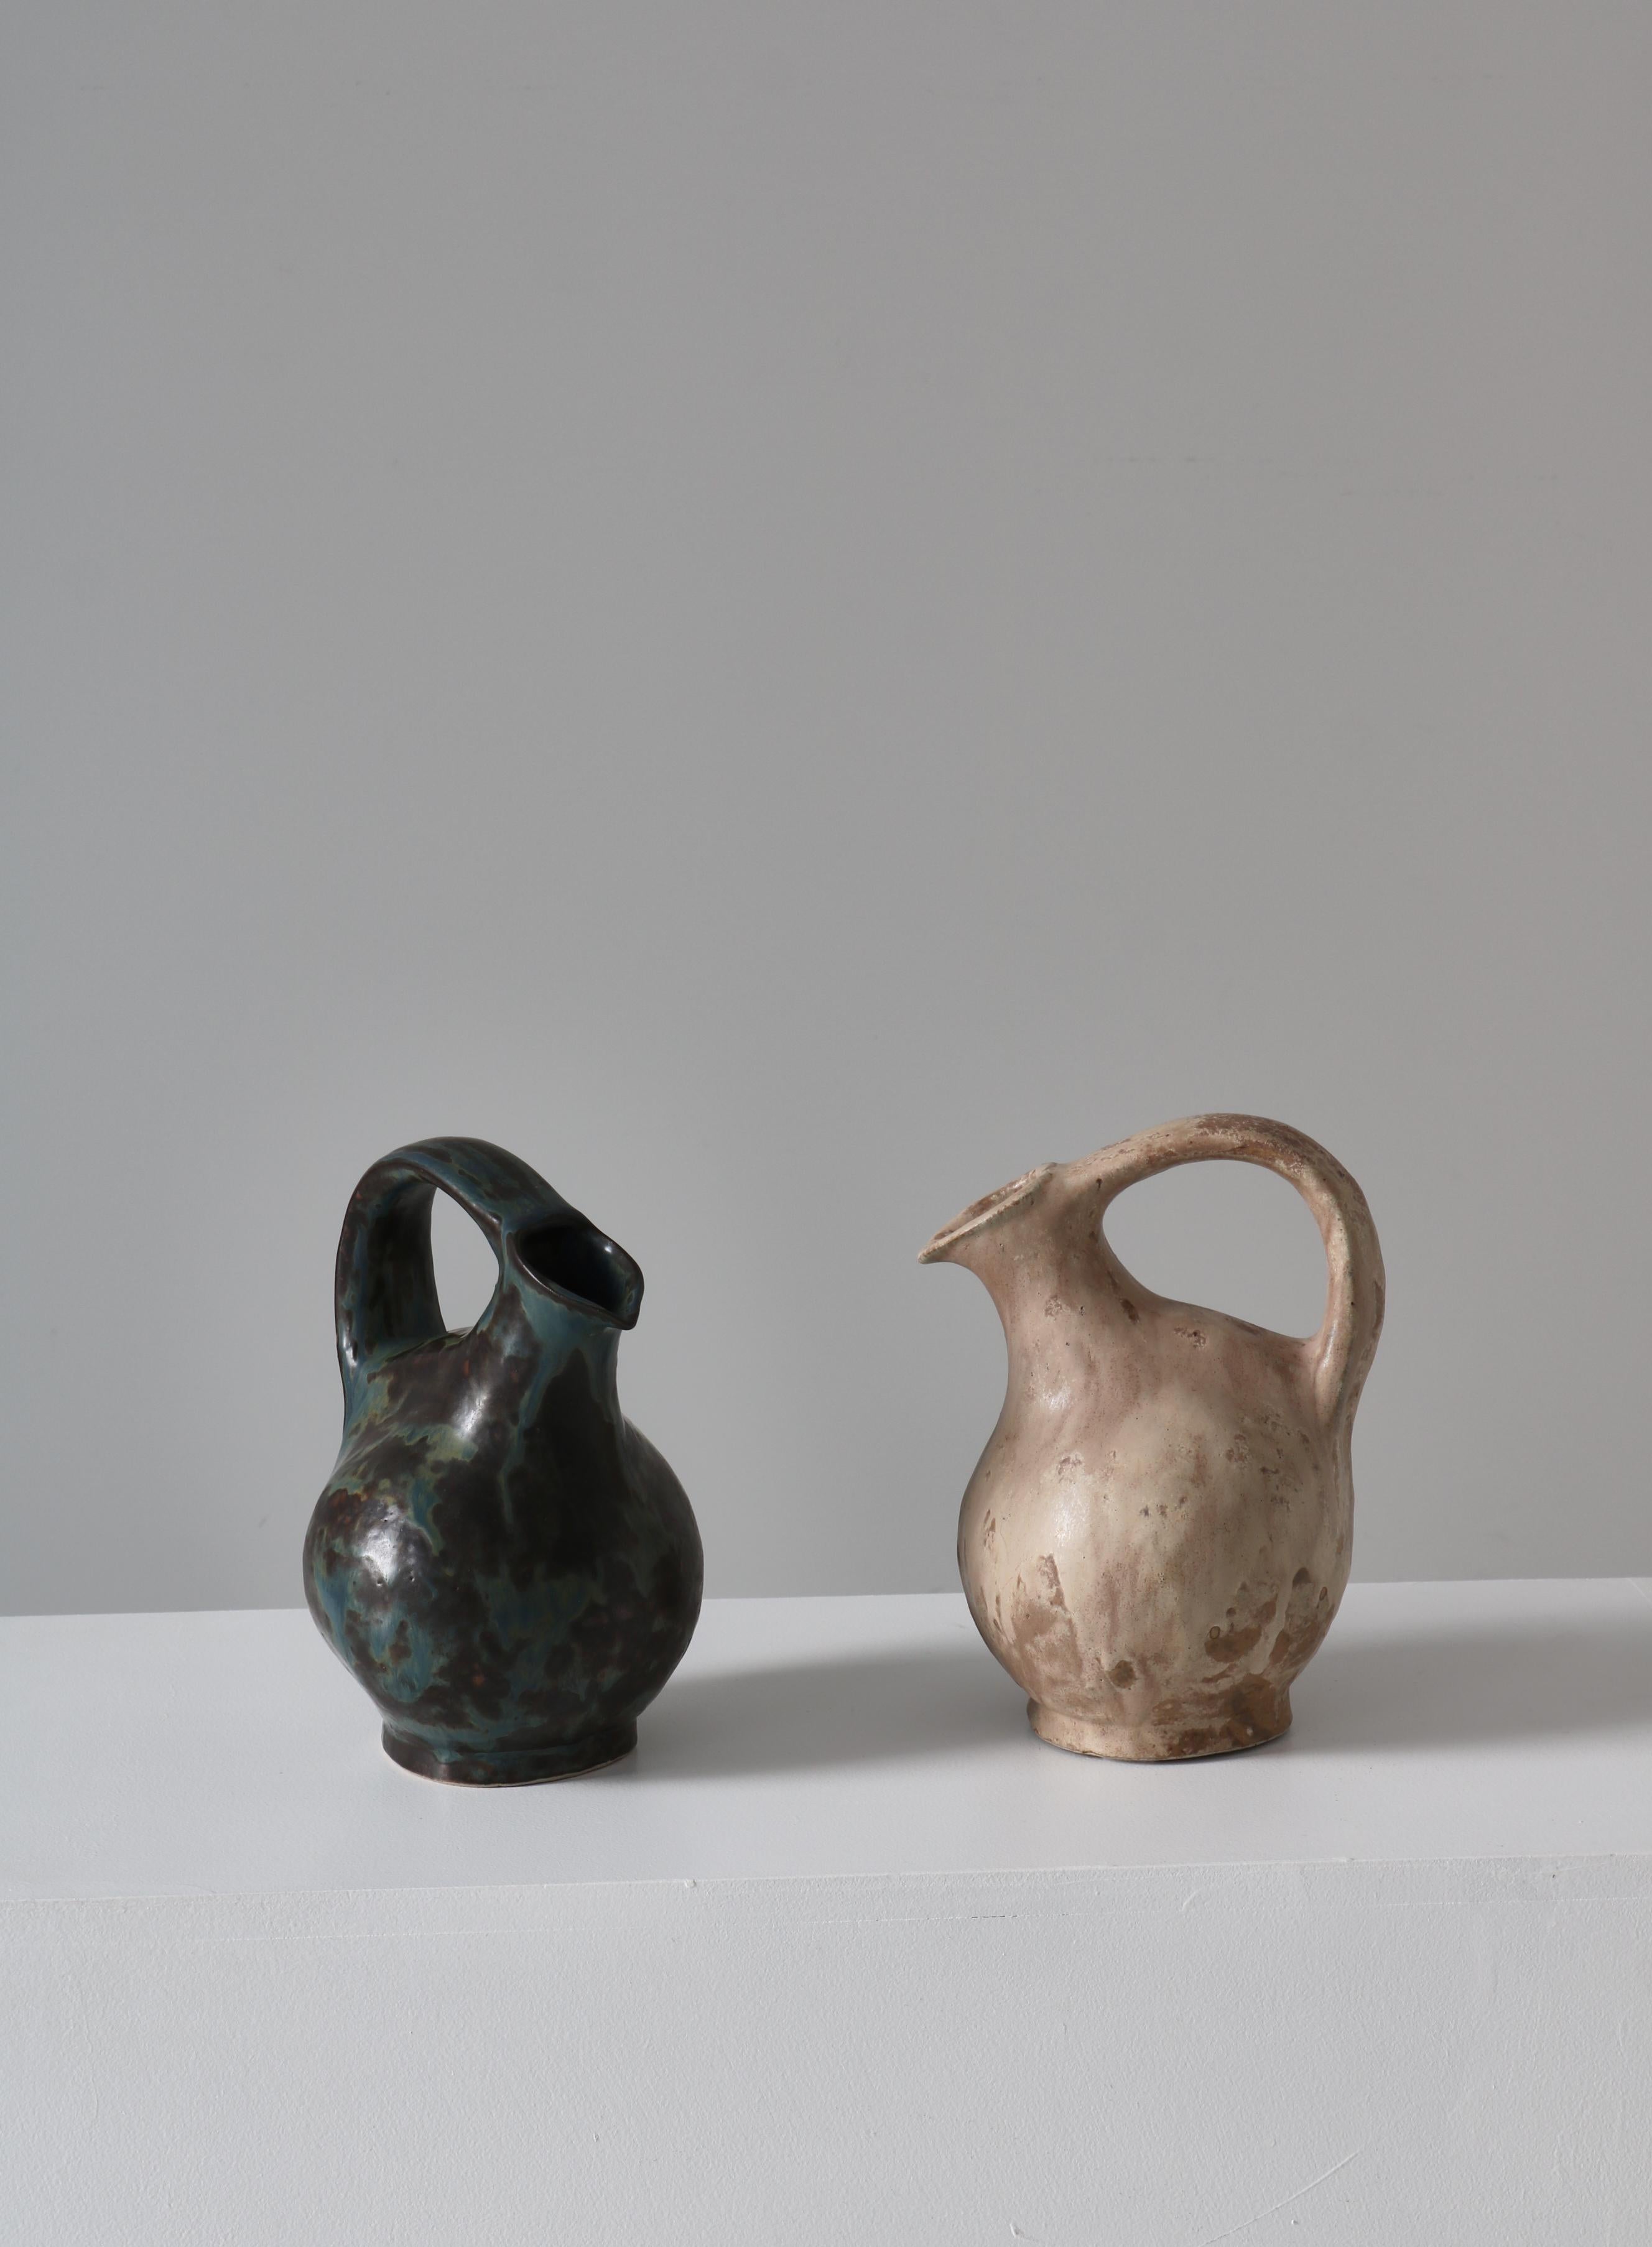 Amazing and unique early stoneware pitchers by Danish ceramic artist Bode Willumsen. Both were made at his own studio in the 1920-30s. The pieces were both hand molded by the artist himself from stoneware with a beautiful thick glazing. Signed by